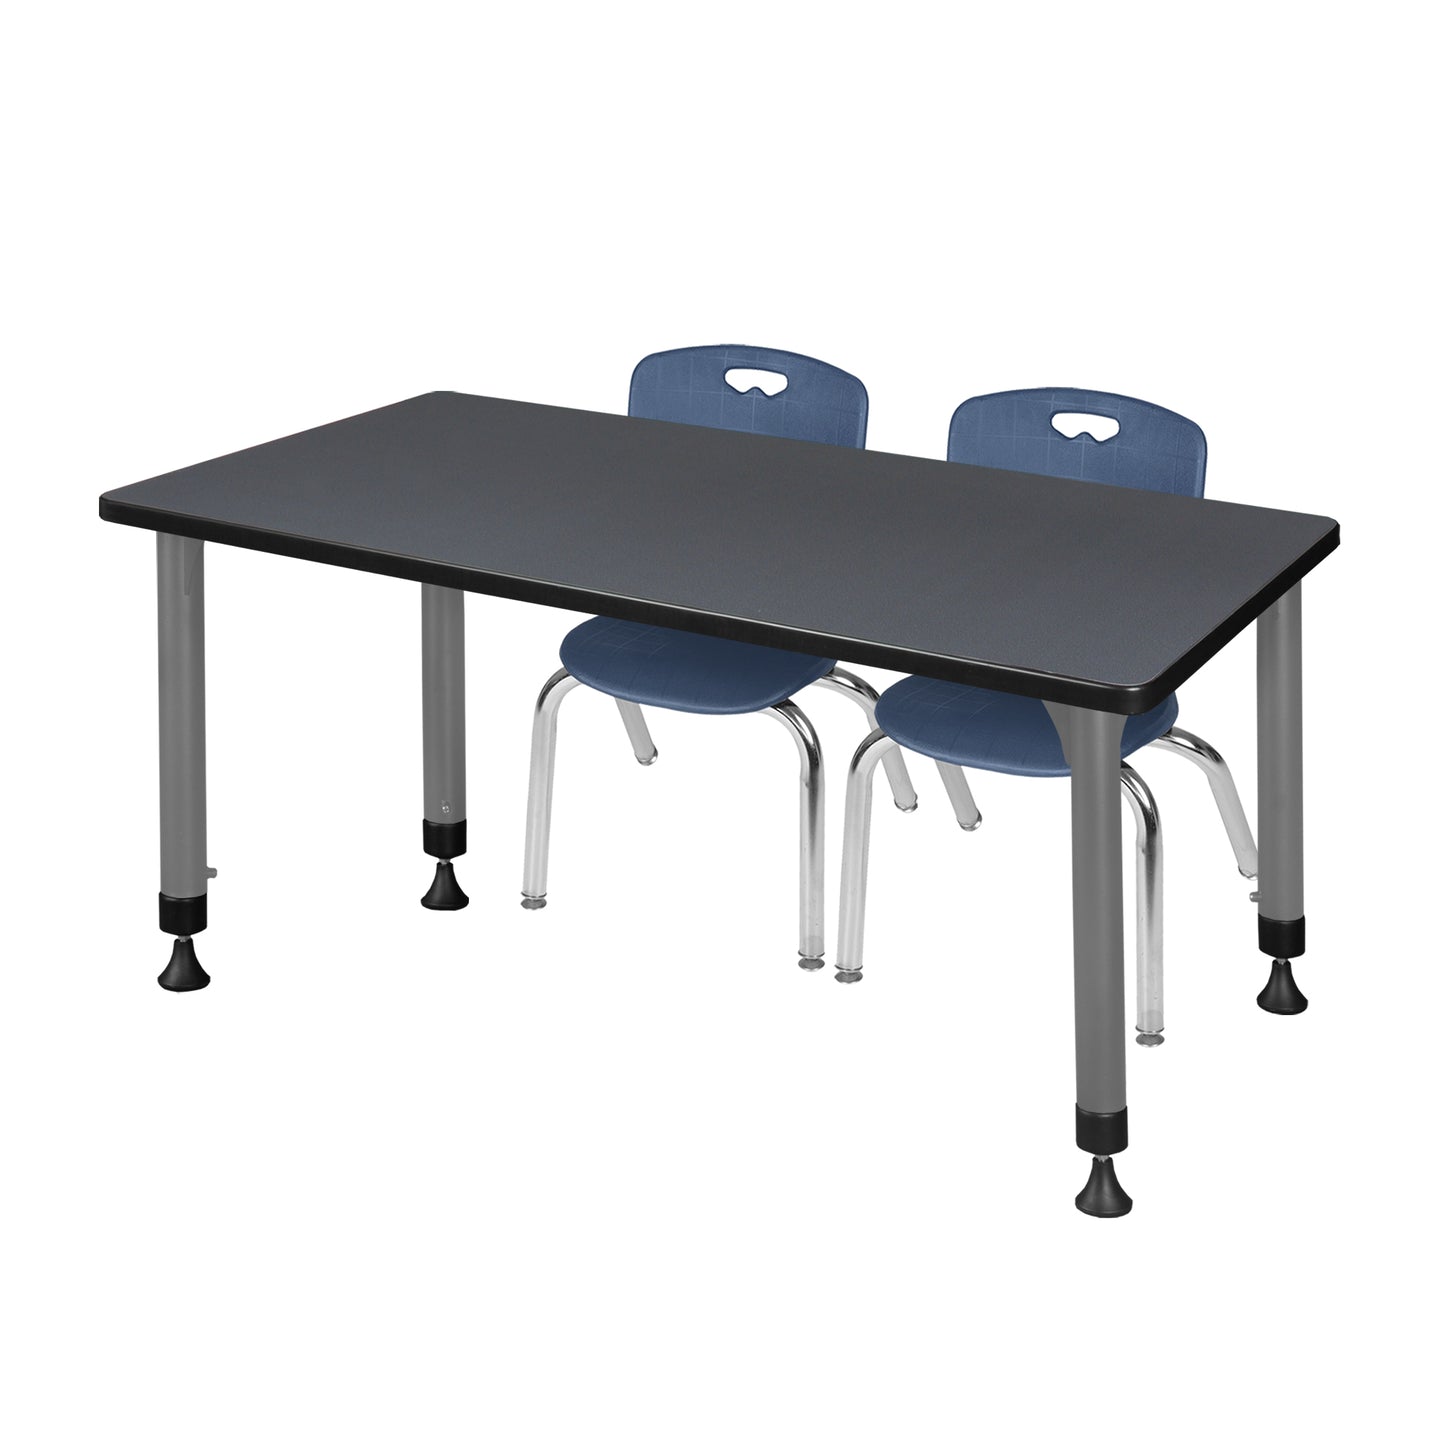 Regency Kee 48 x 30 in. Adjustable Classroom Table & 2 Andy 12 in. Stack Chairs